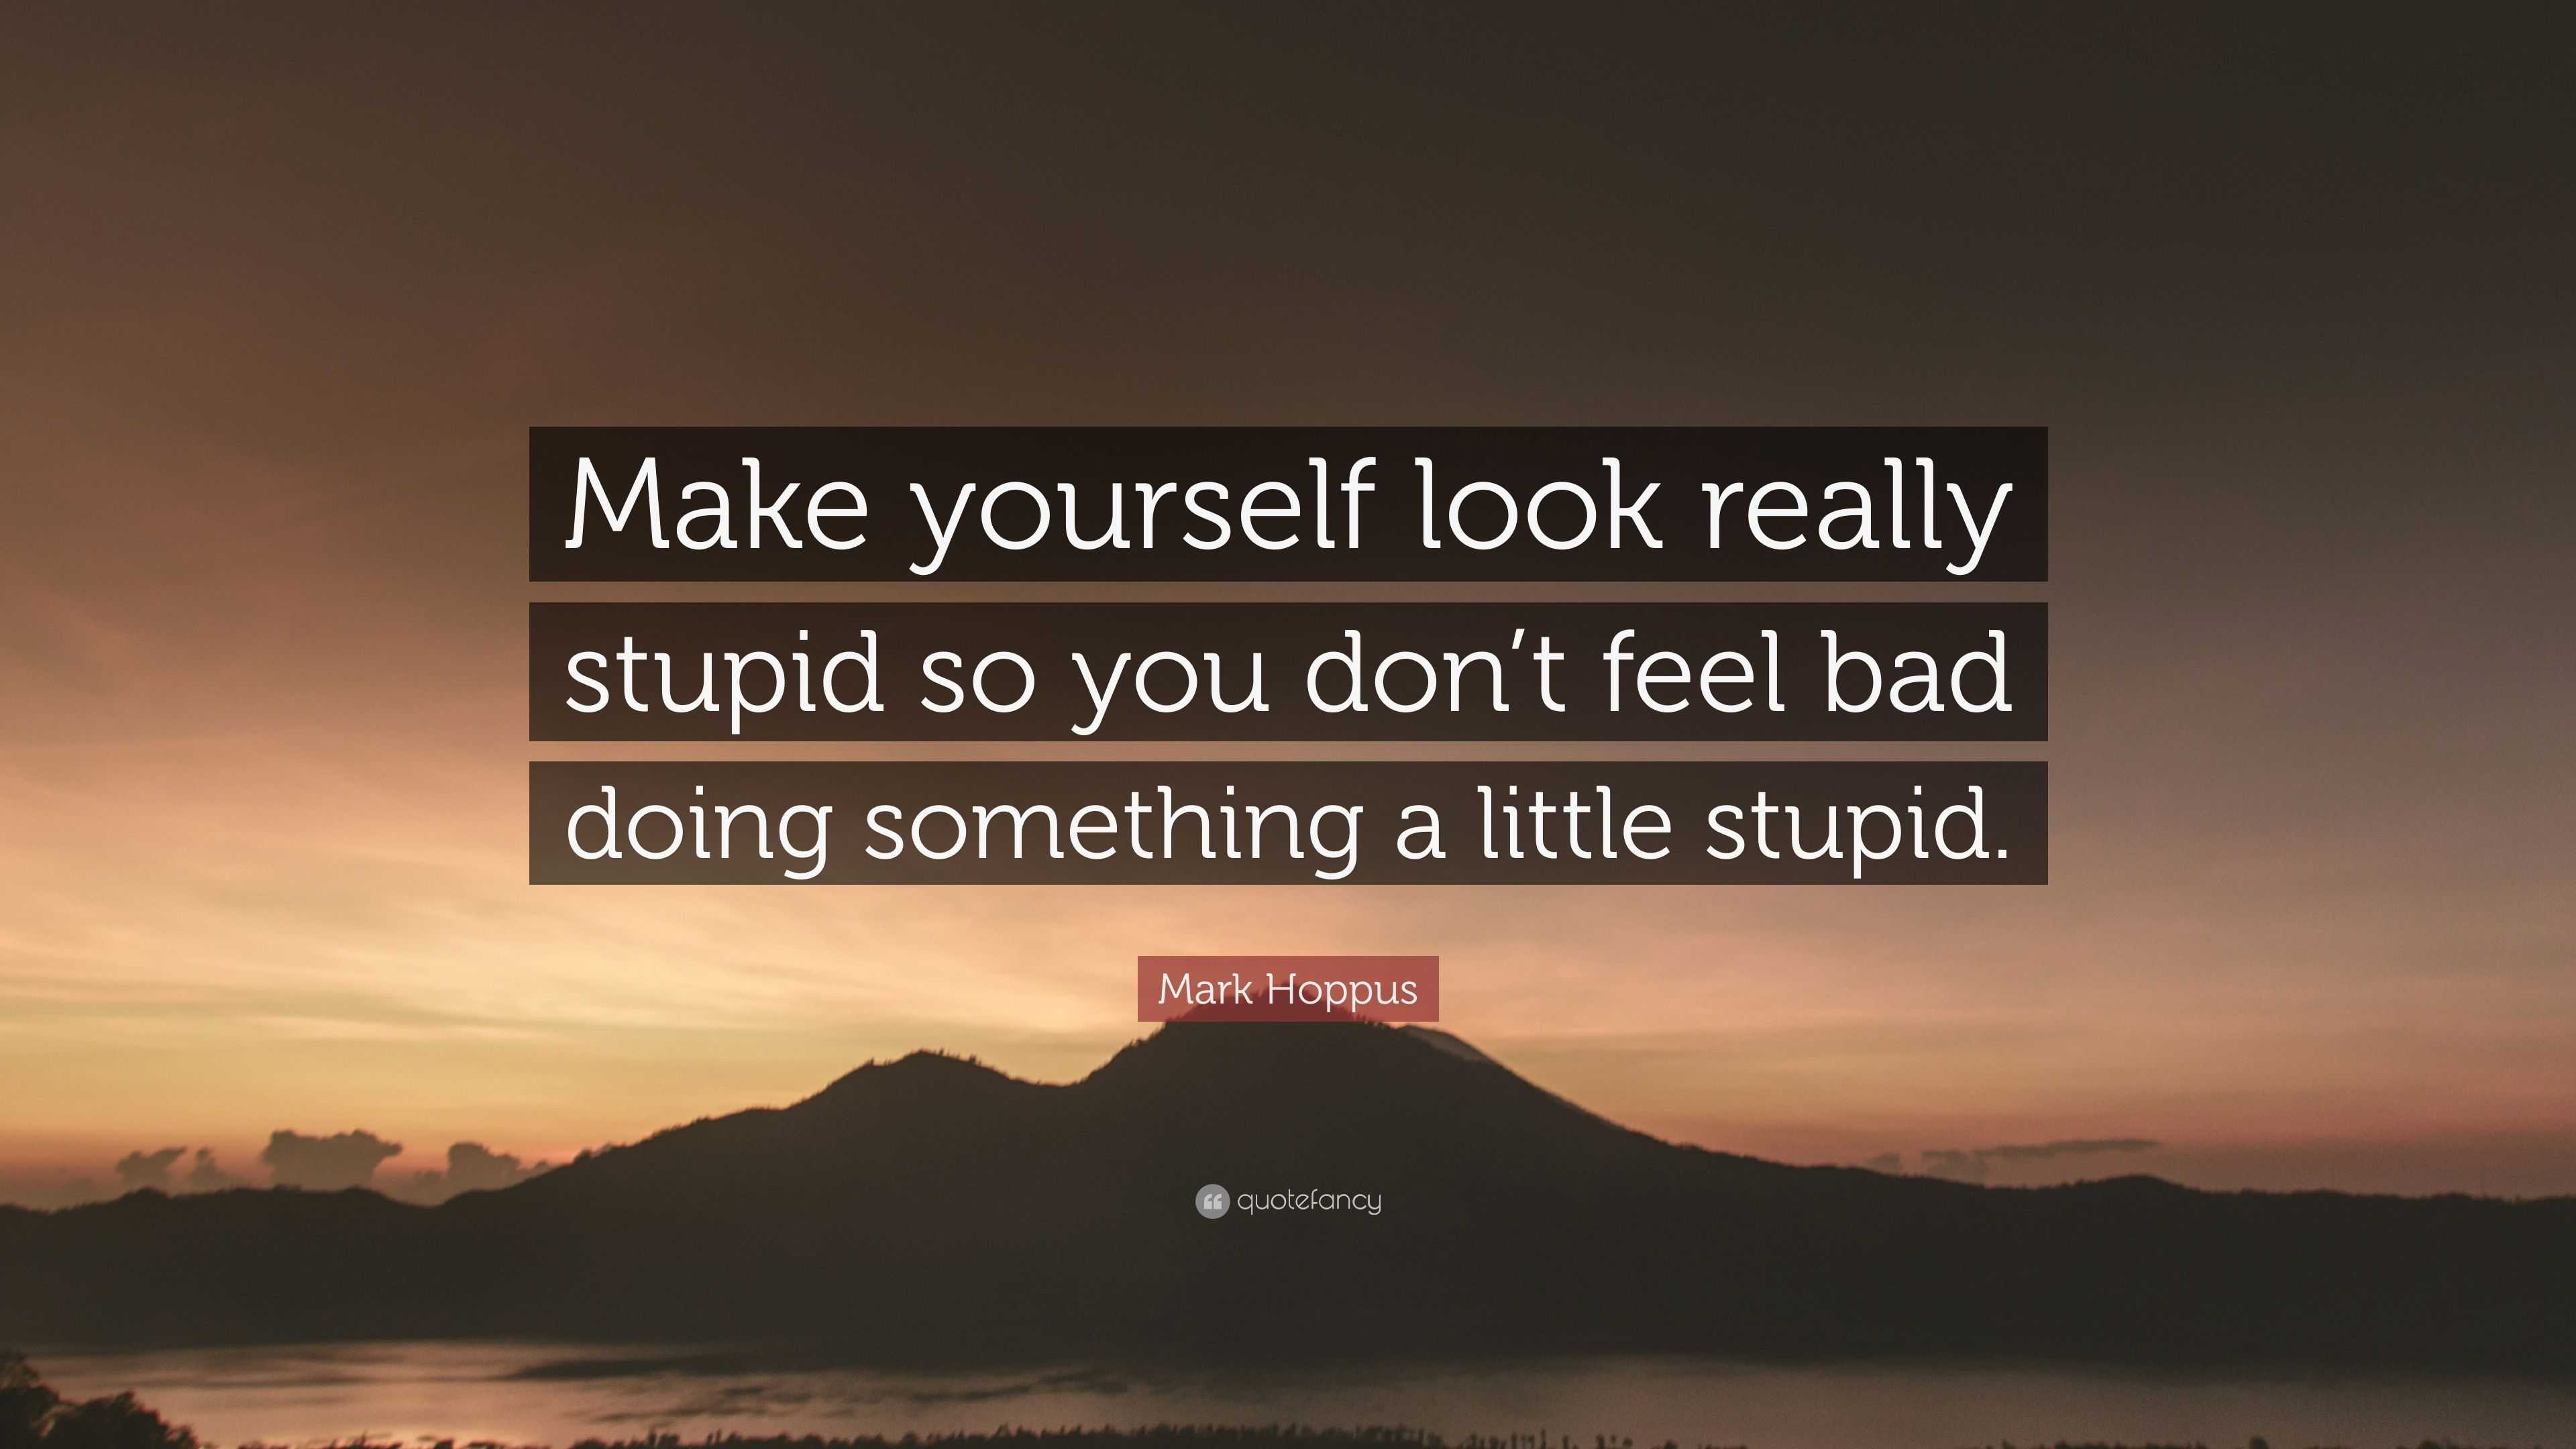 Mark Hoppus Quote: “Make yourself look really stupid so you don’t feel